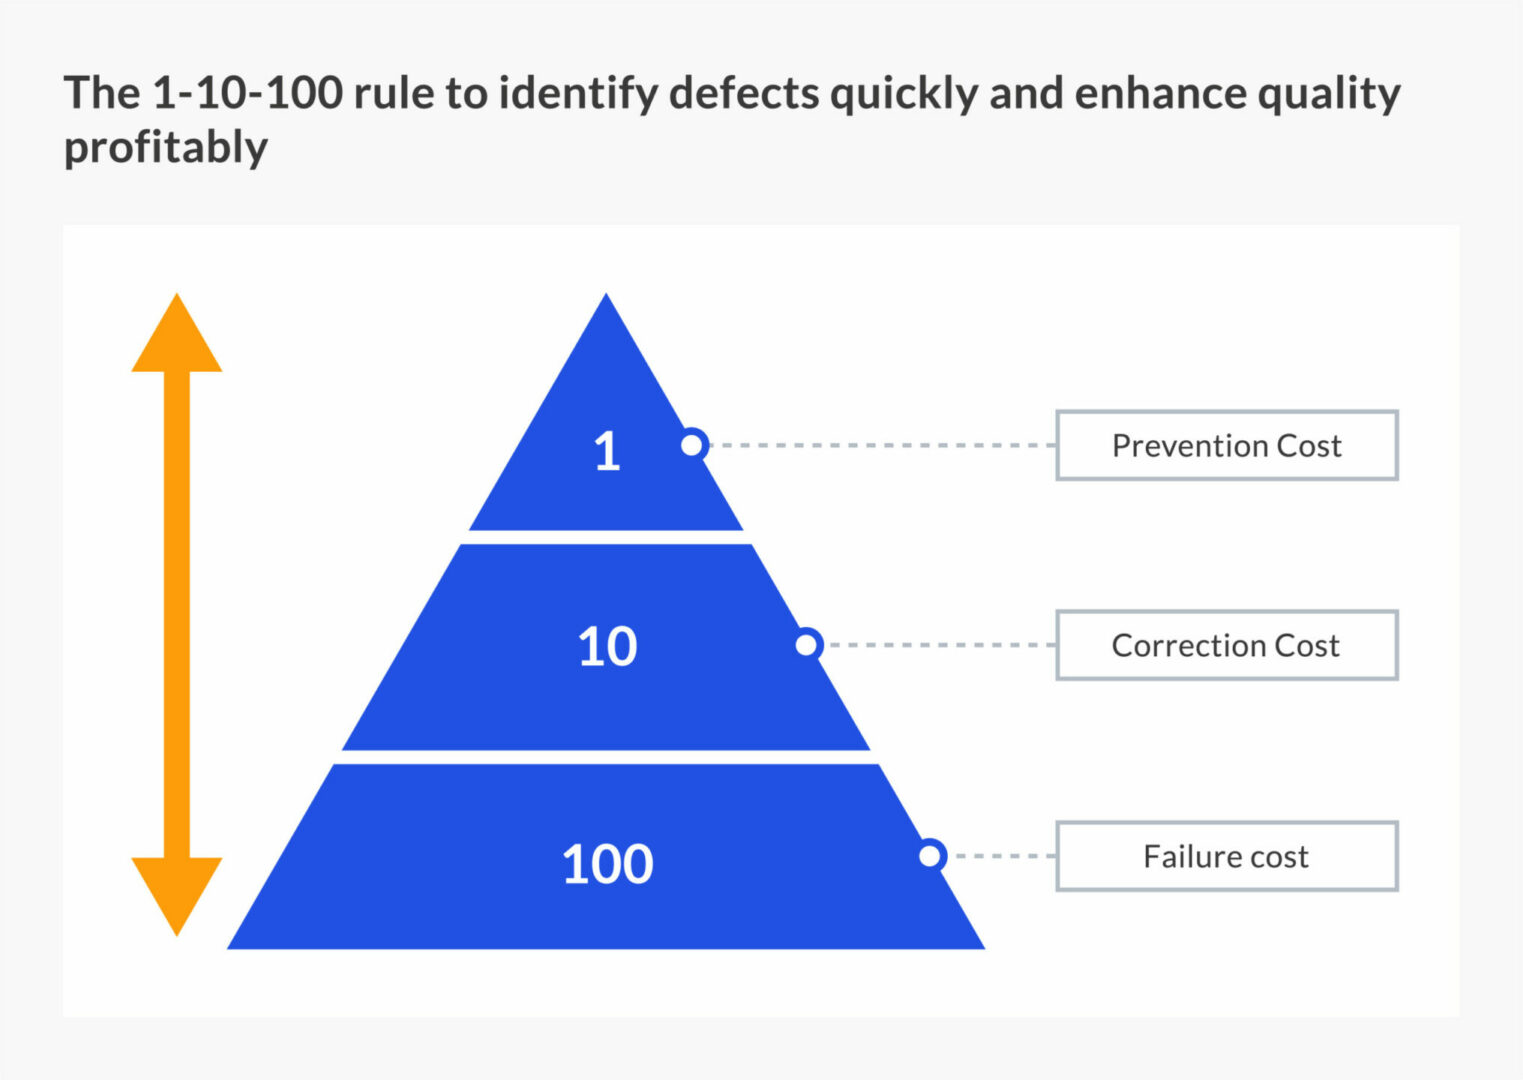 The 1-10-100 rule and impact on prevention, correction and failure costs